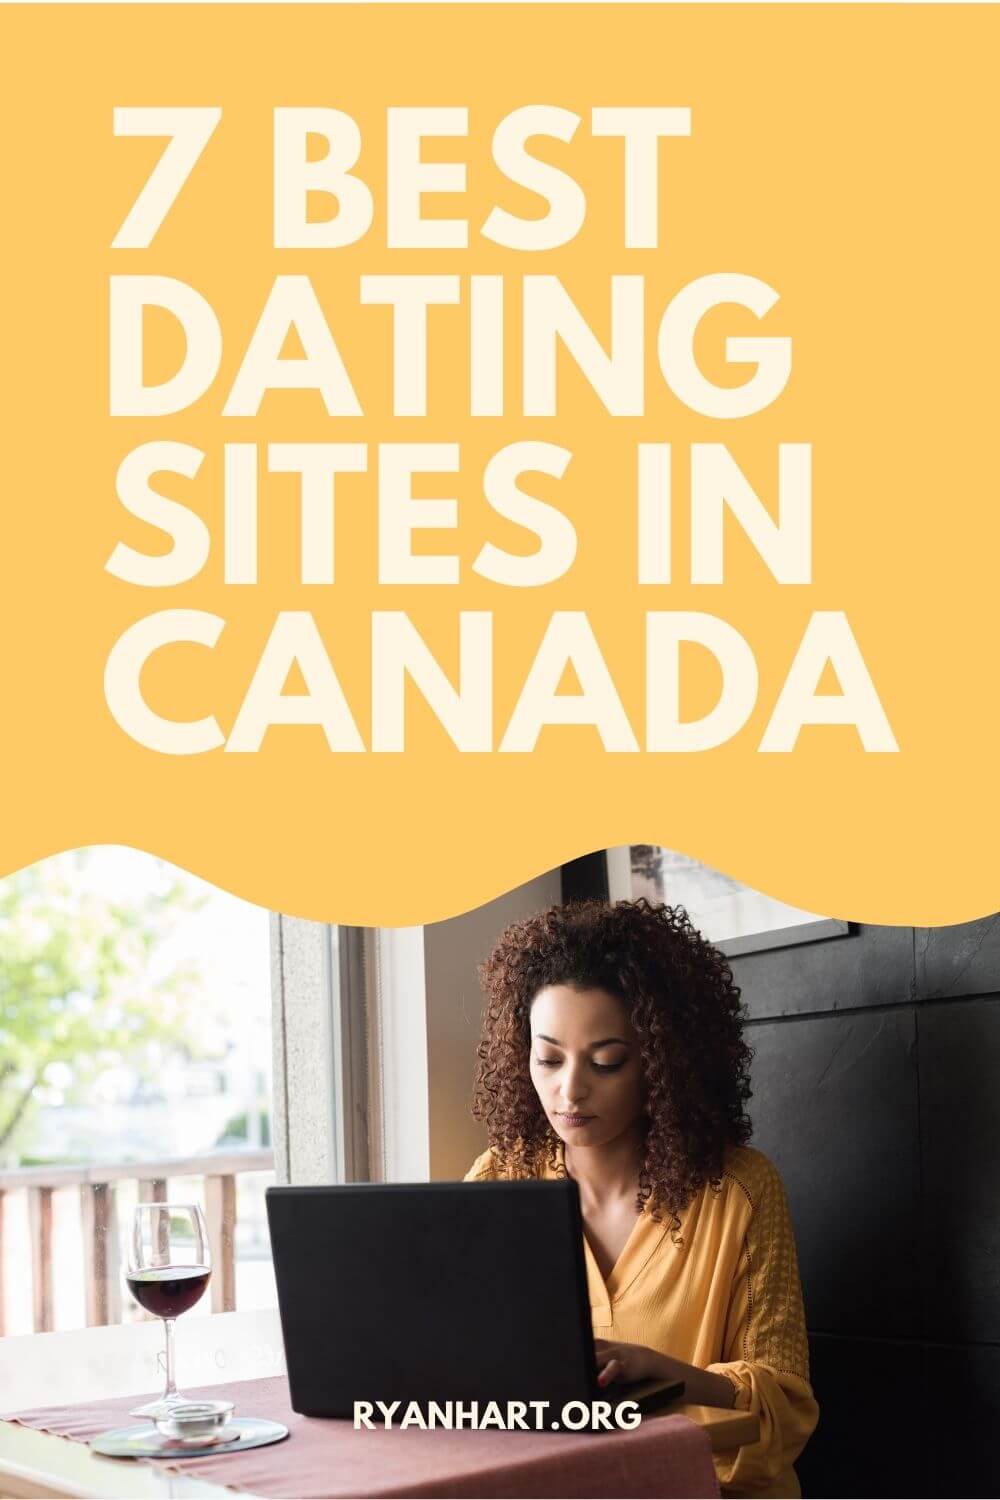 Woman using dating website